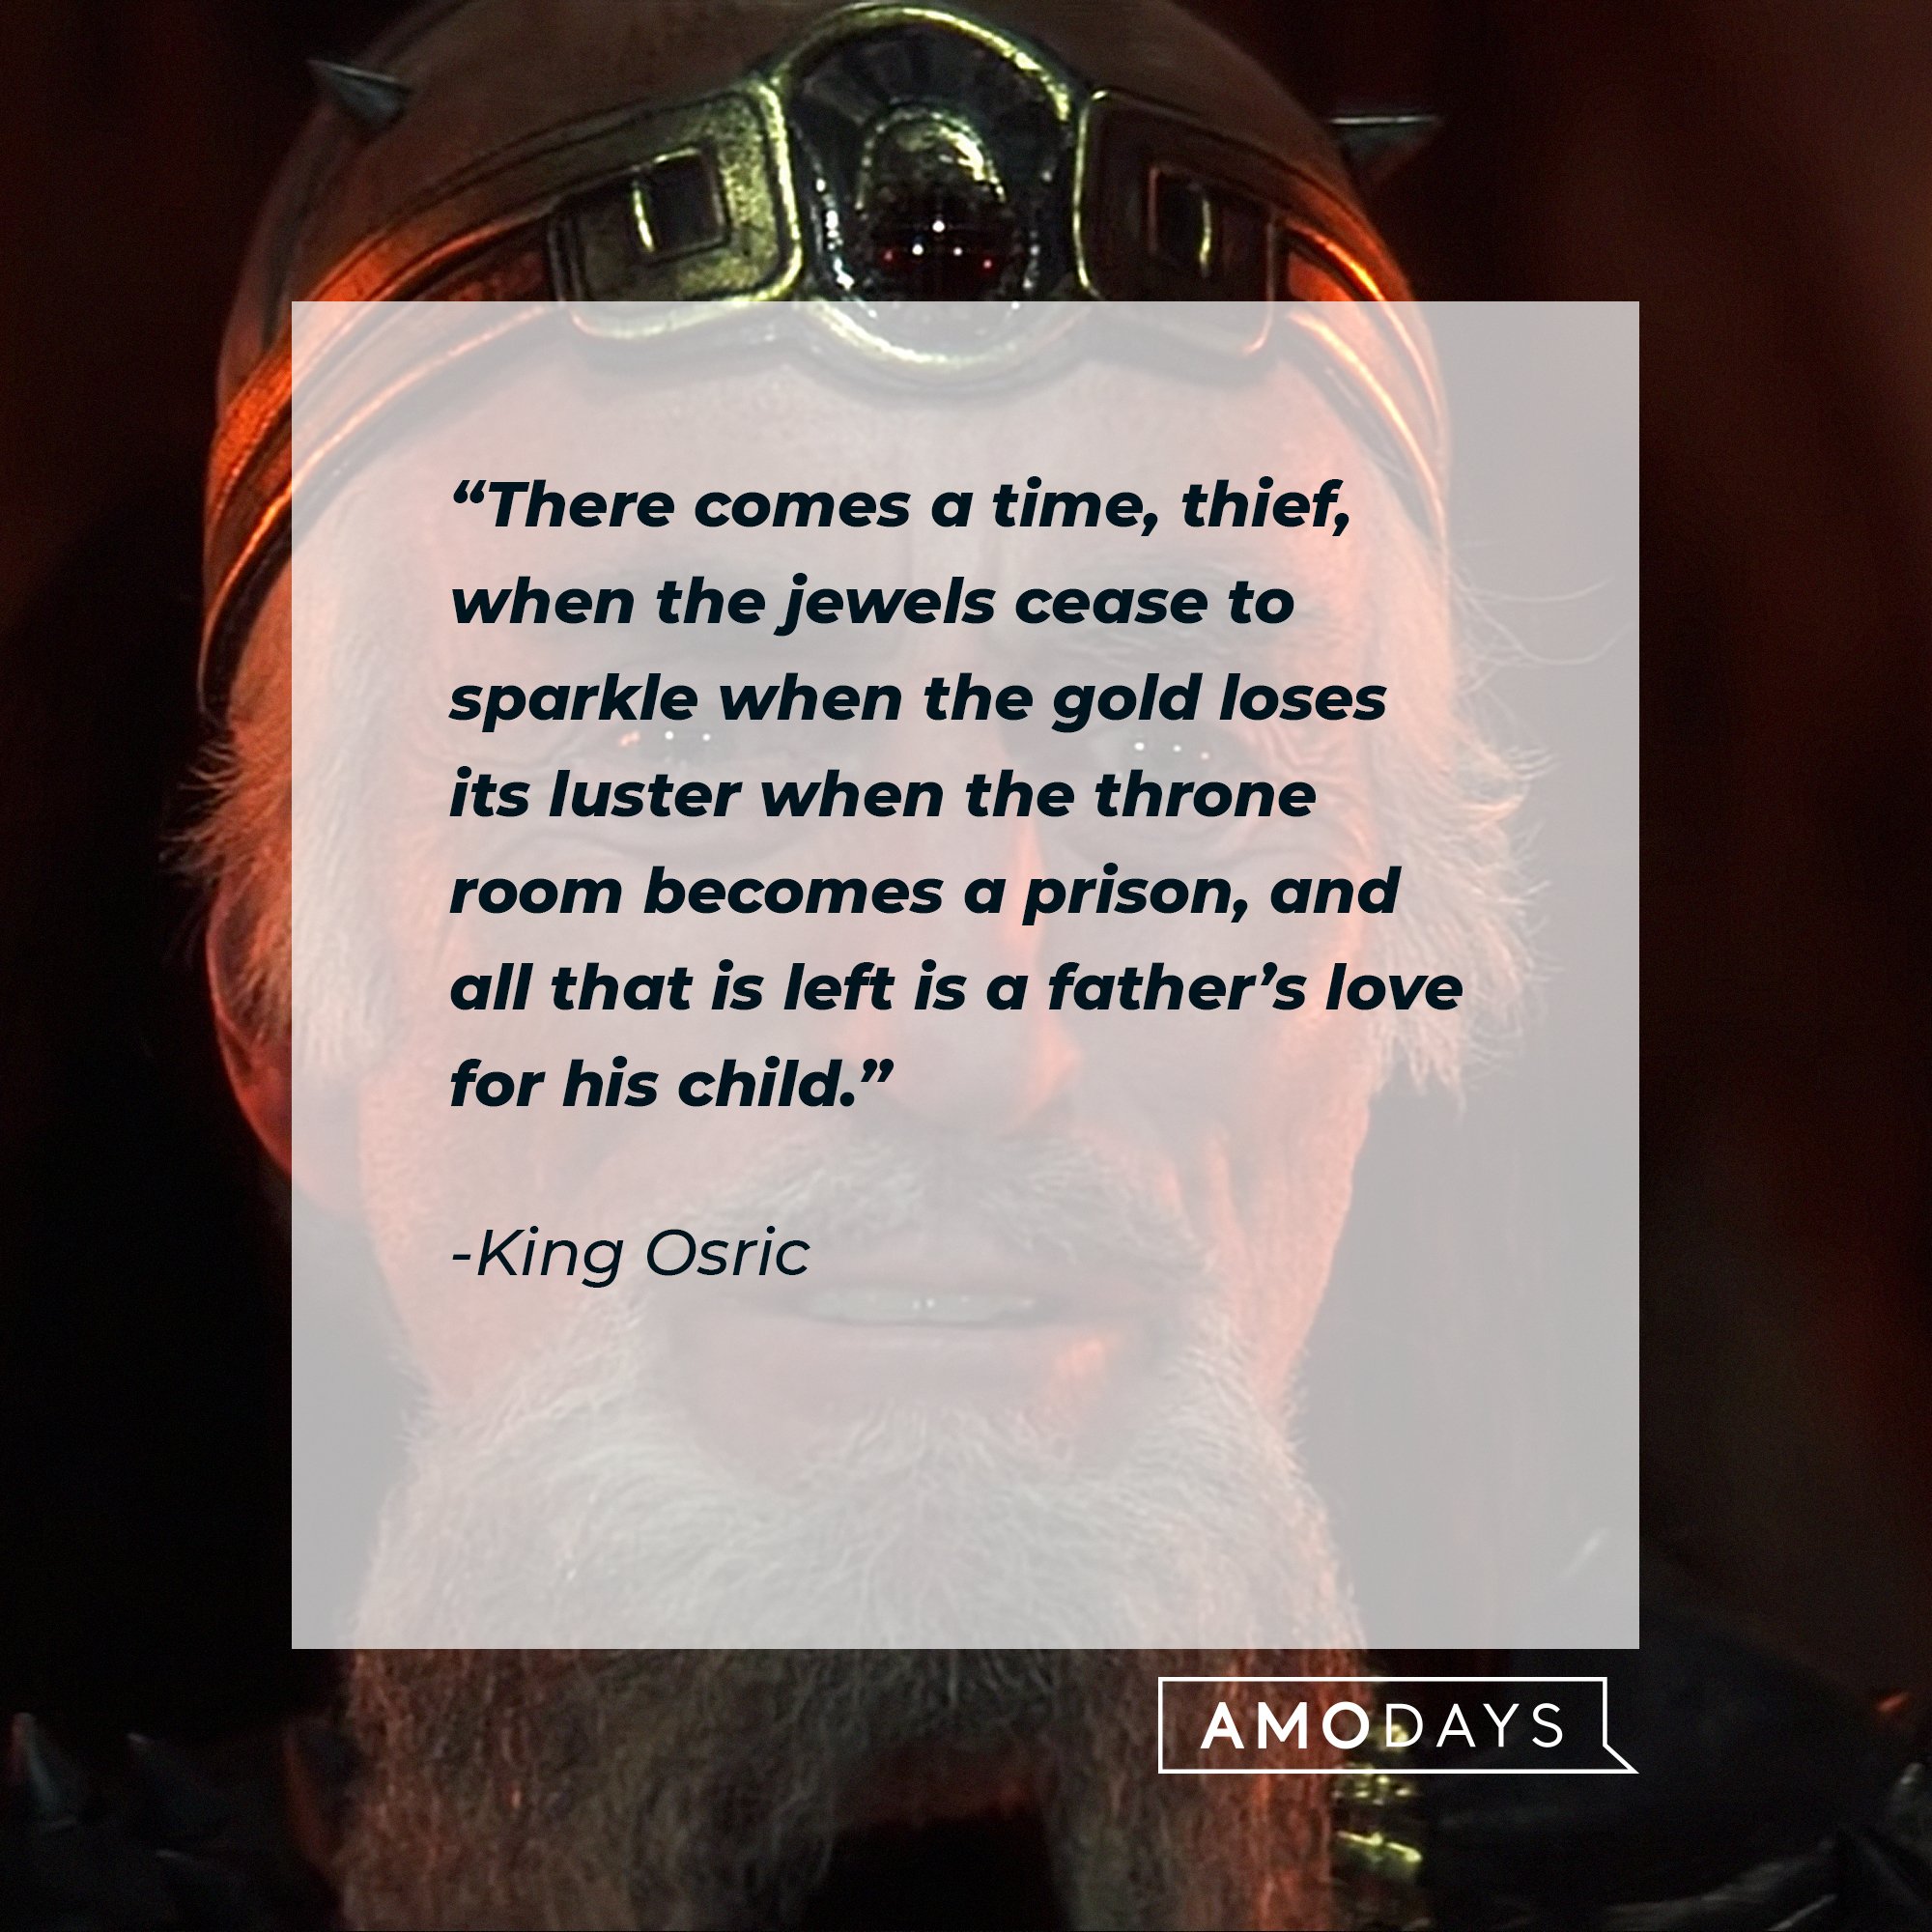 King Osric's quote: “There comes a time, thief, when the jewels cease to sparkle when the gold loses its luster when the throne room becomes a prison, and all that is left is a father’s love for his child.” | Image: AmoDays